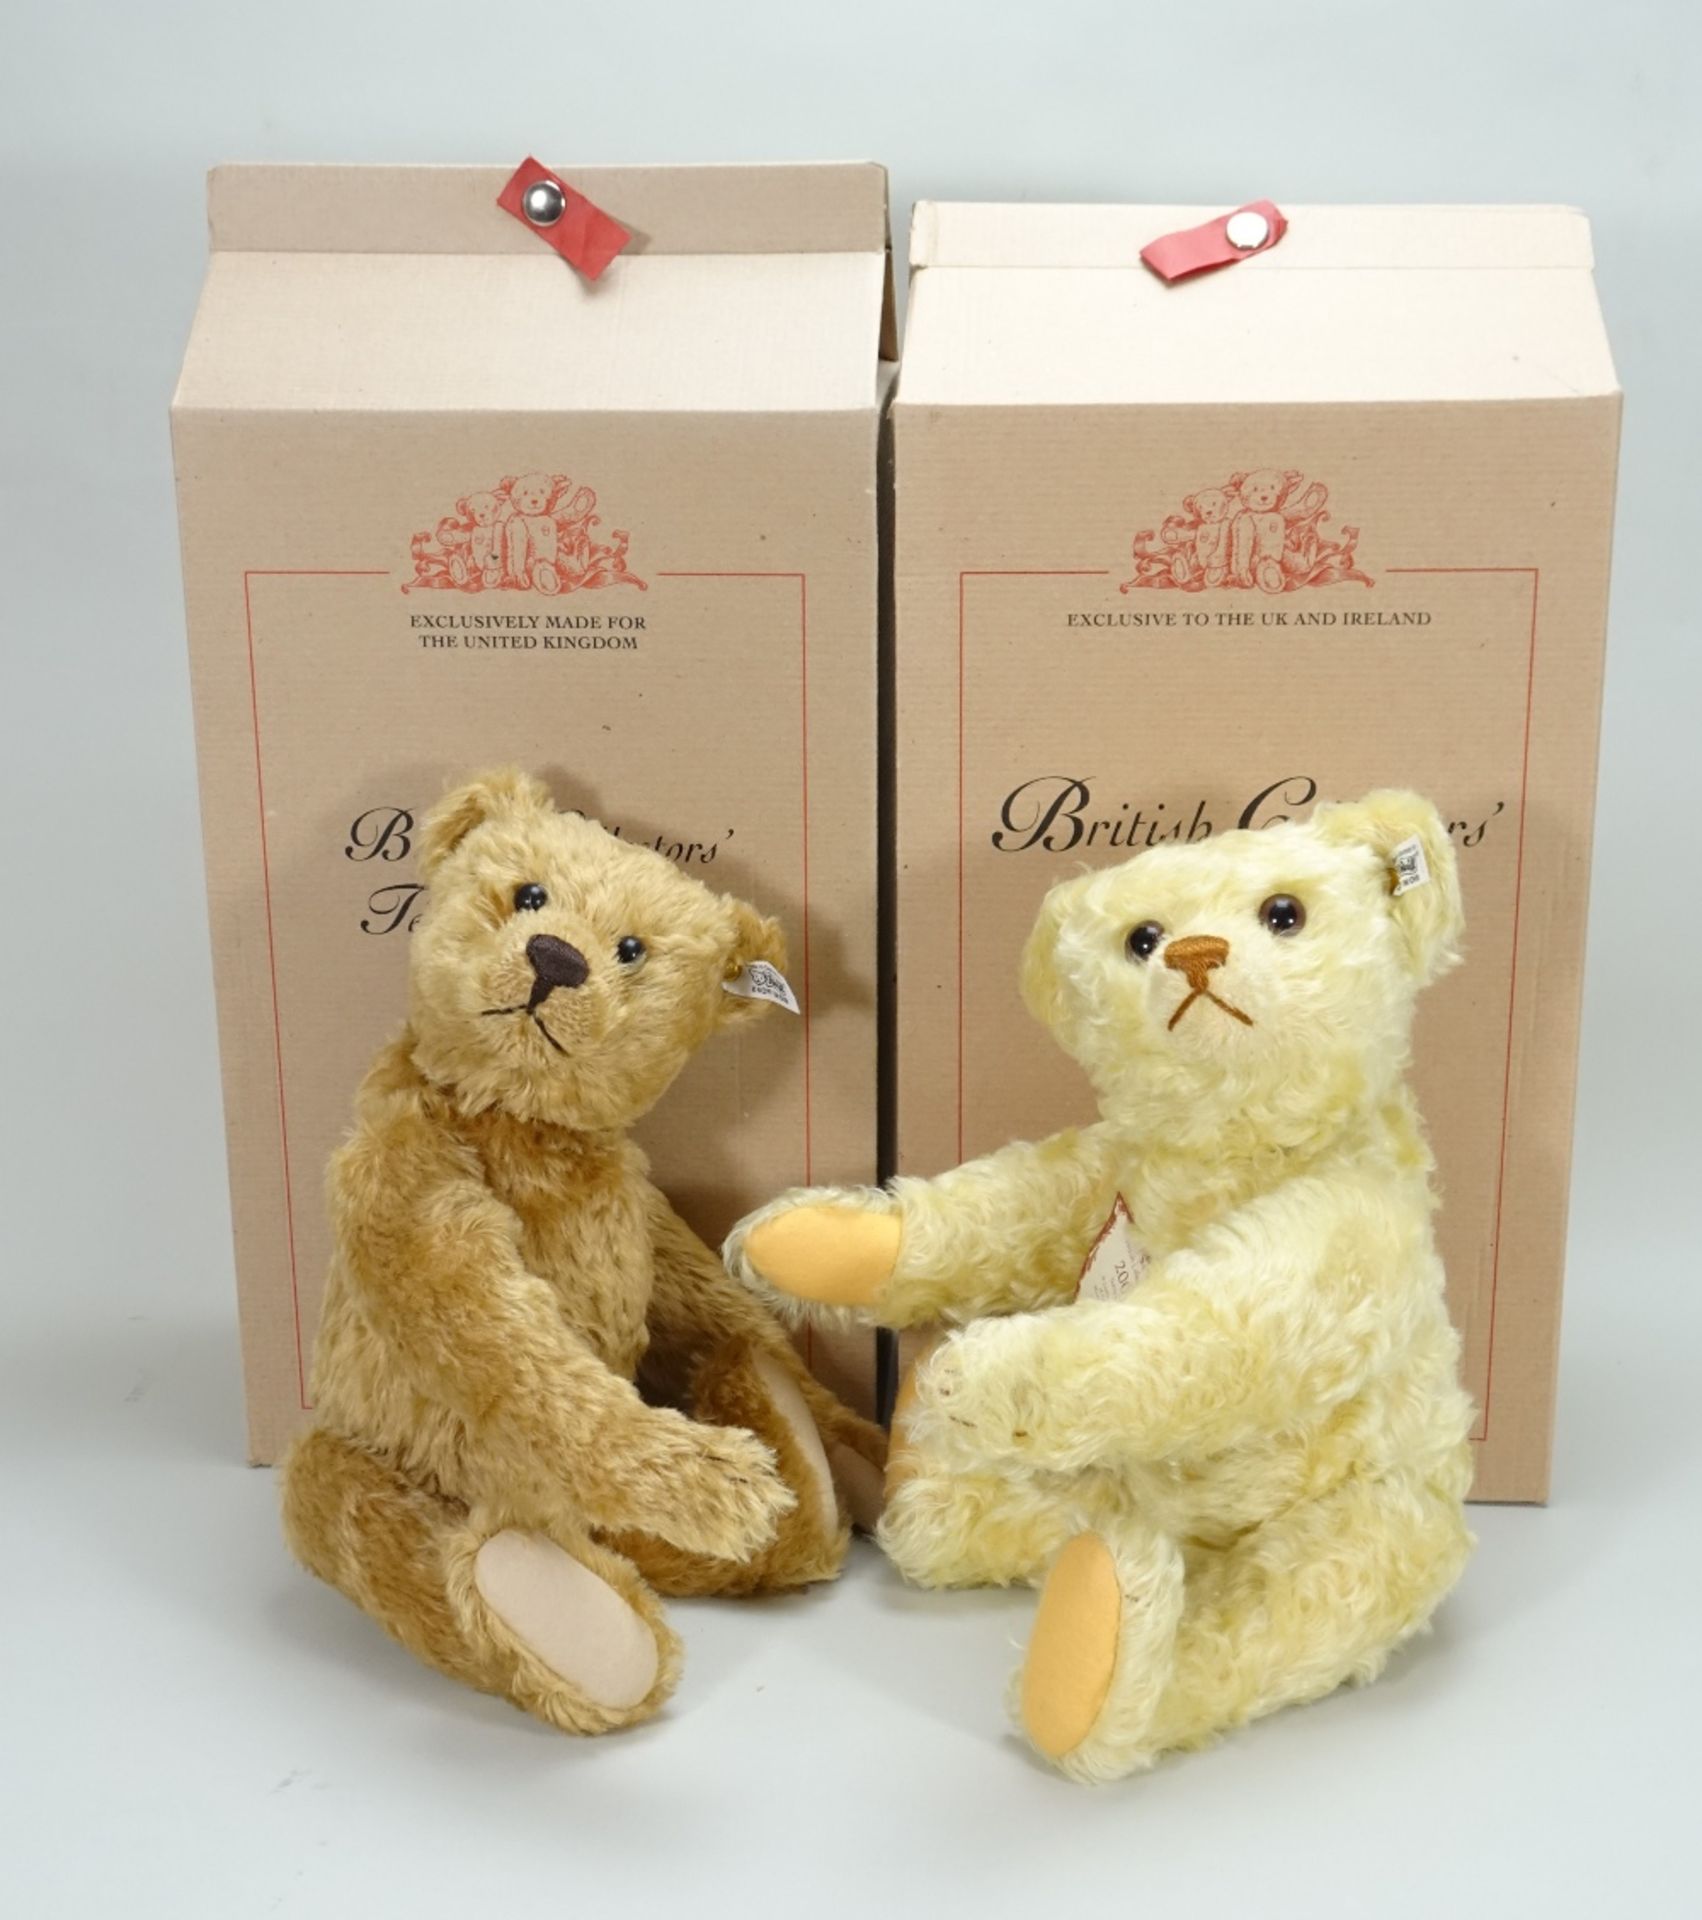 Two Steiff Limited Editions British Collectors Teddy Bears 2002 & 2003,